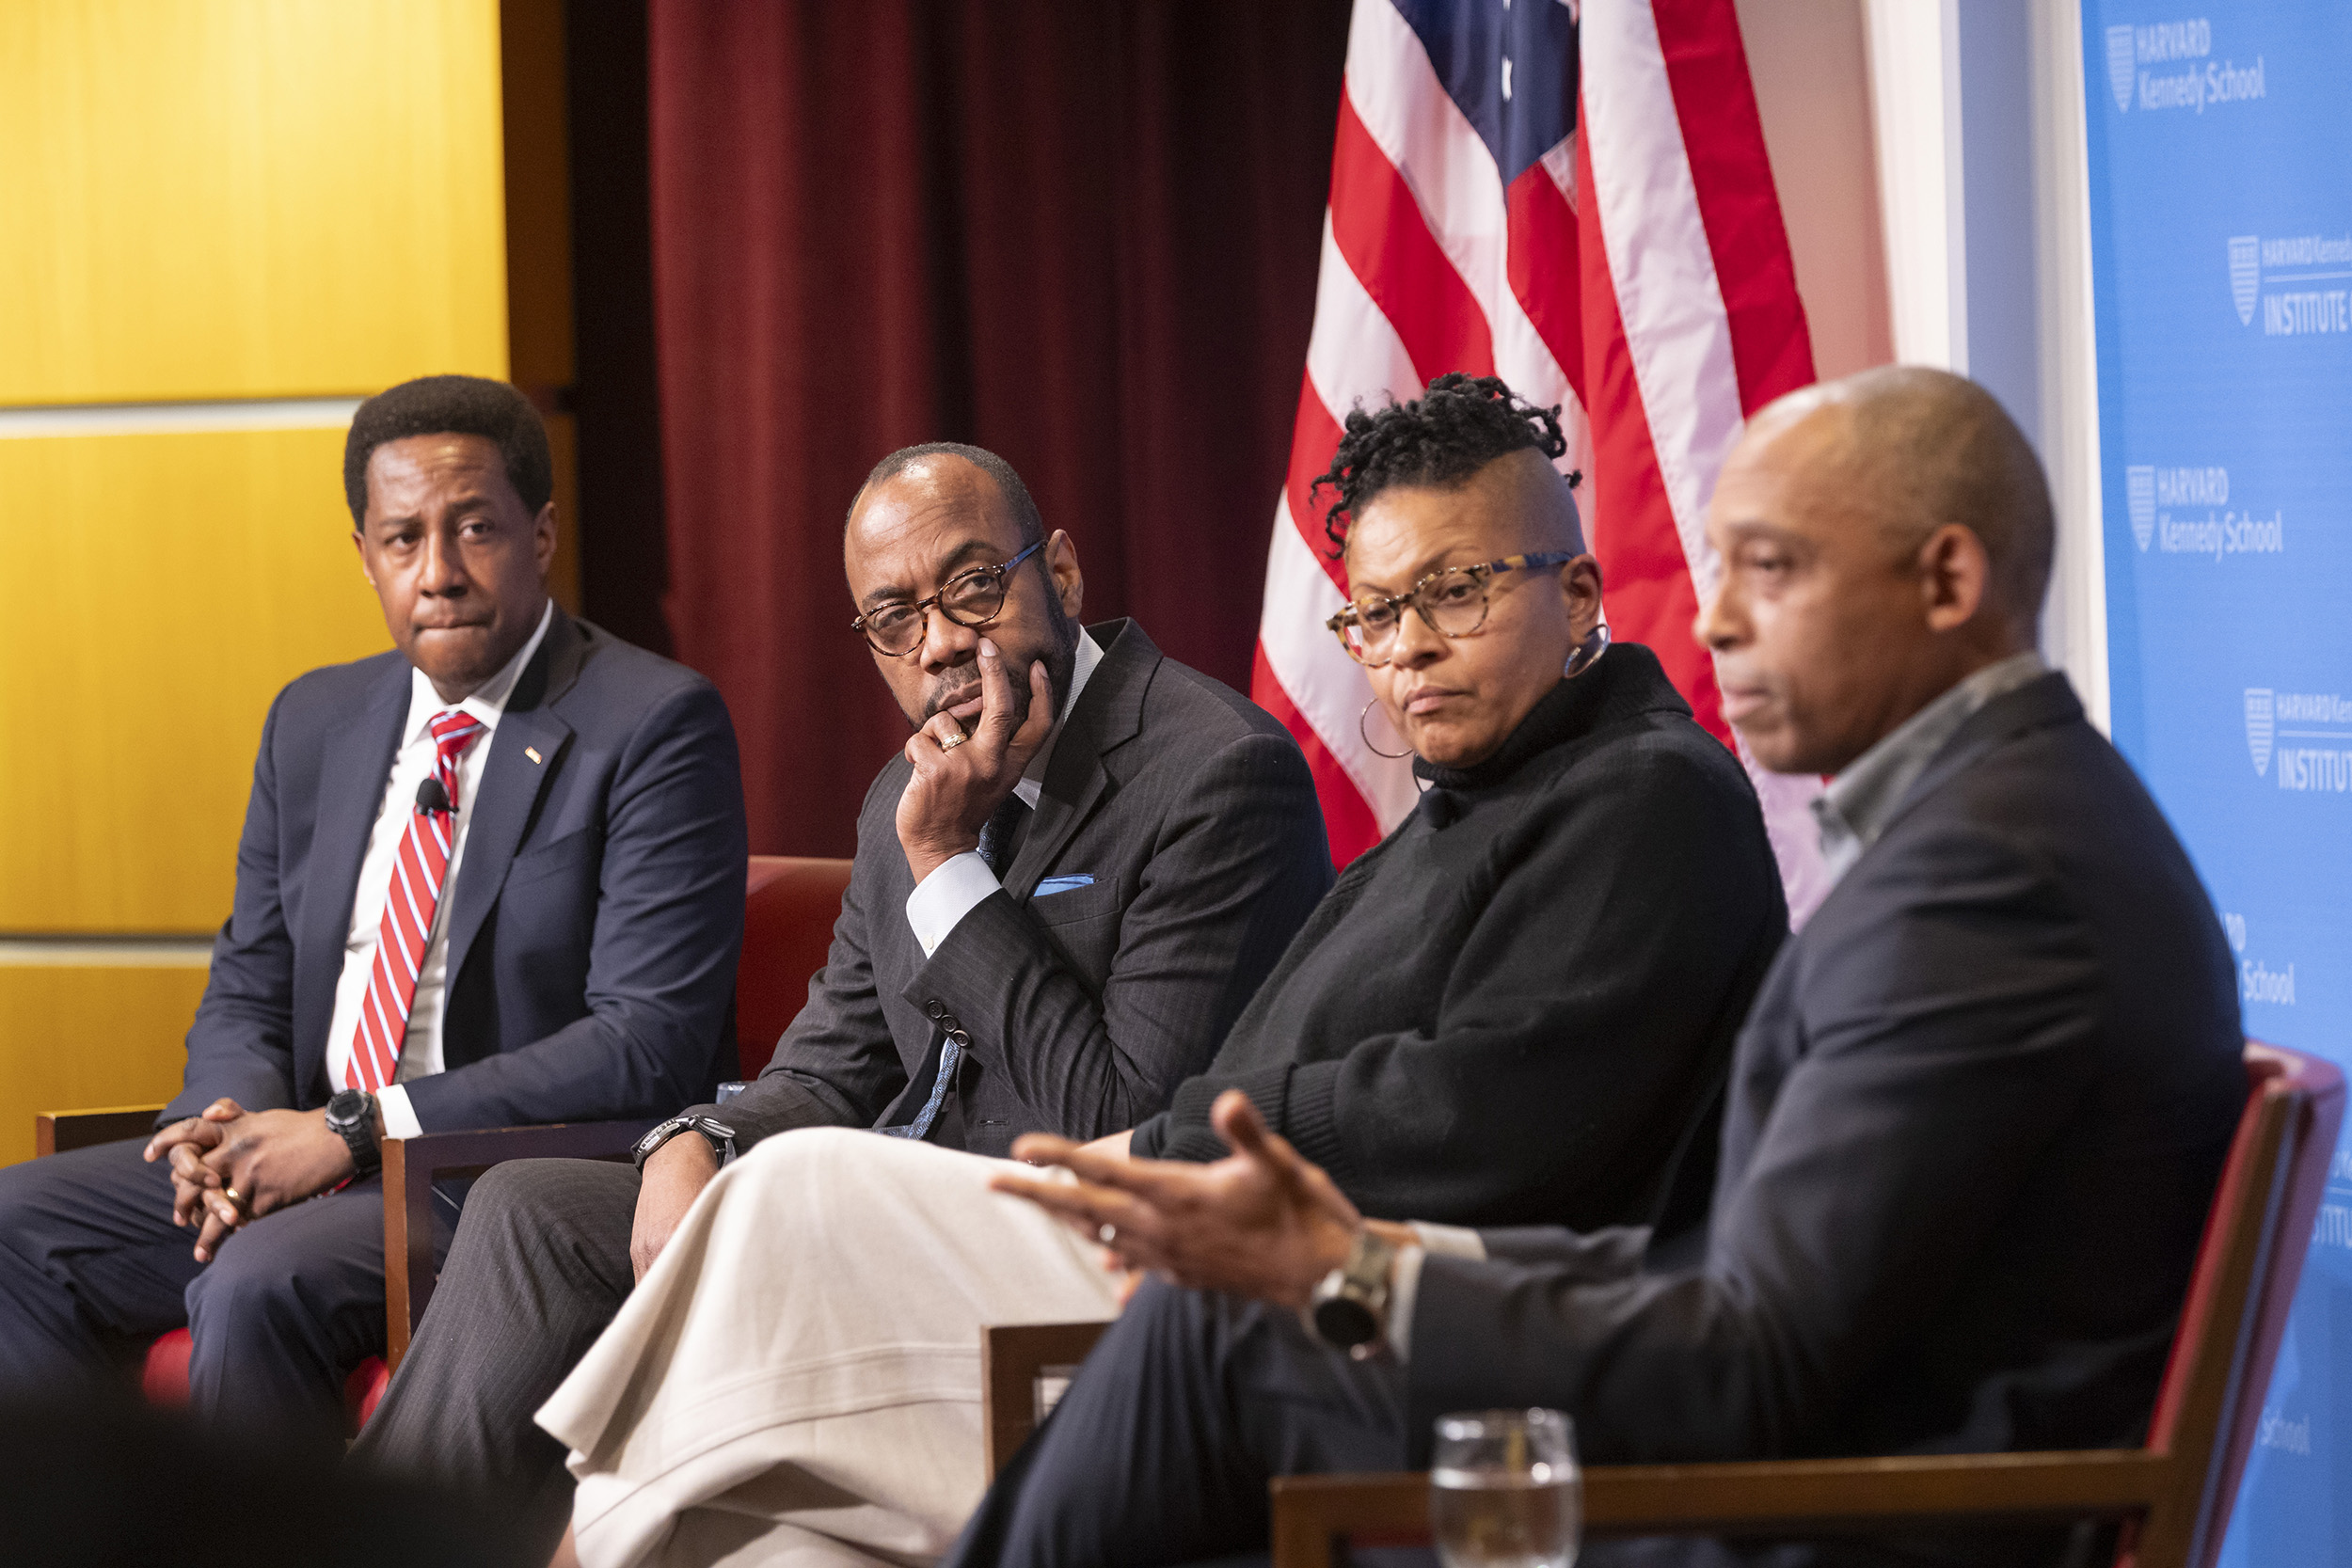 Setti Warren (from left), Cornell William Brooks, Sandra Susan Smith, and Khalil Gibran Muhammad speaking during the event.